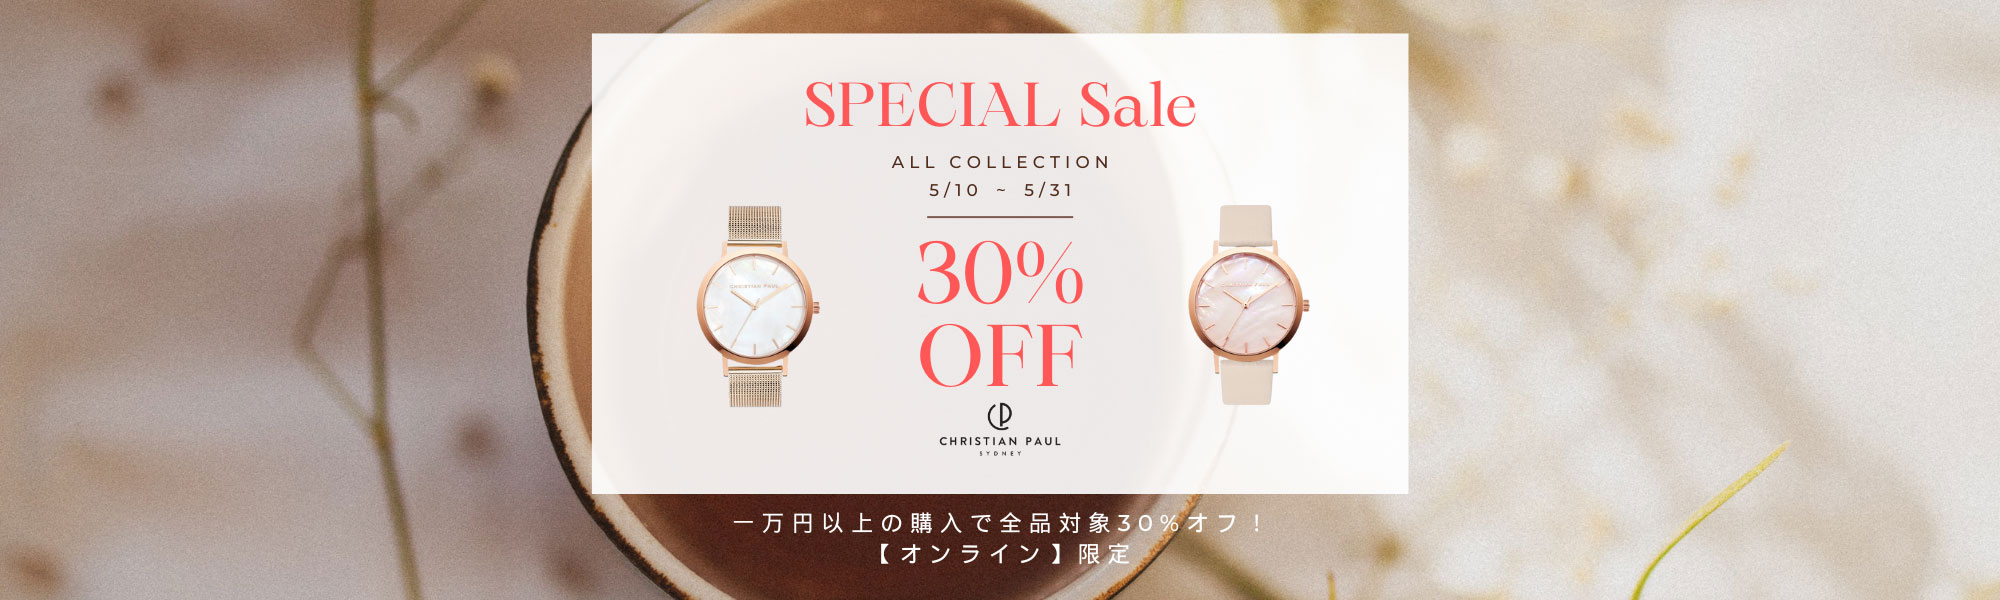 SPECIAL Sale